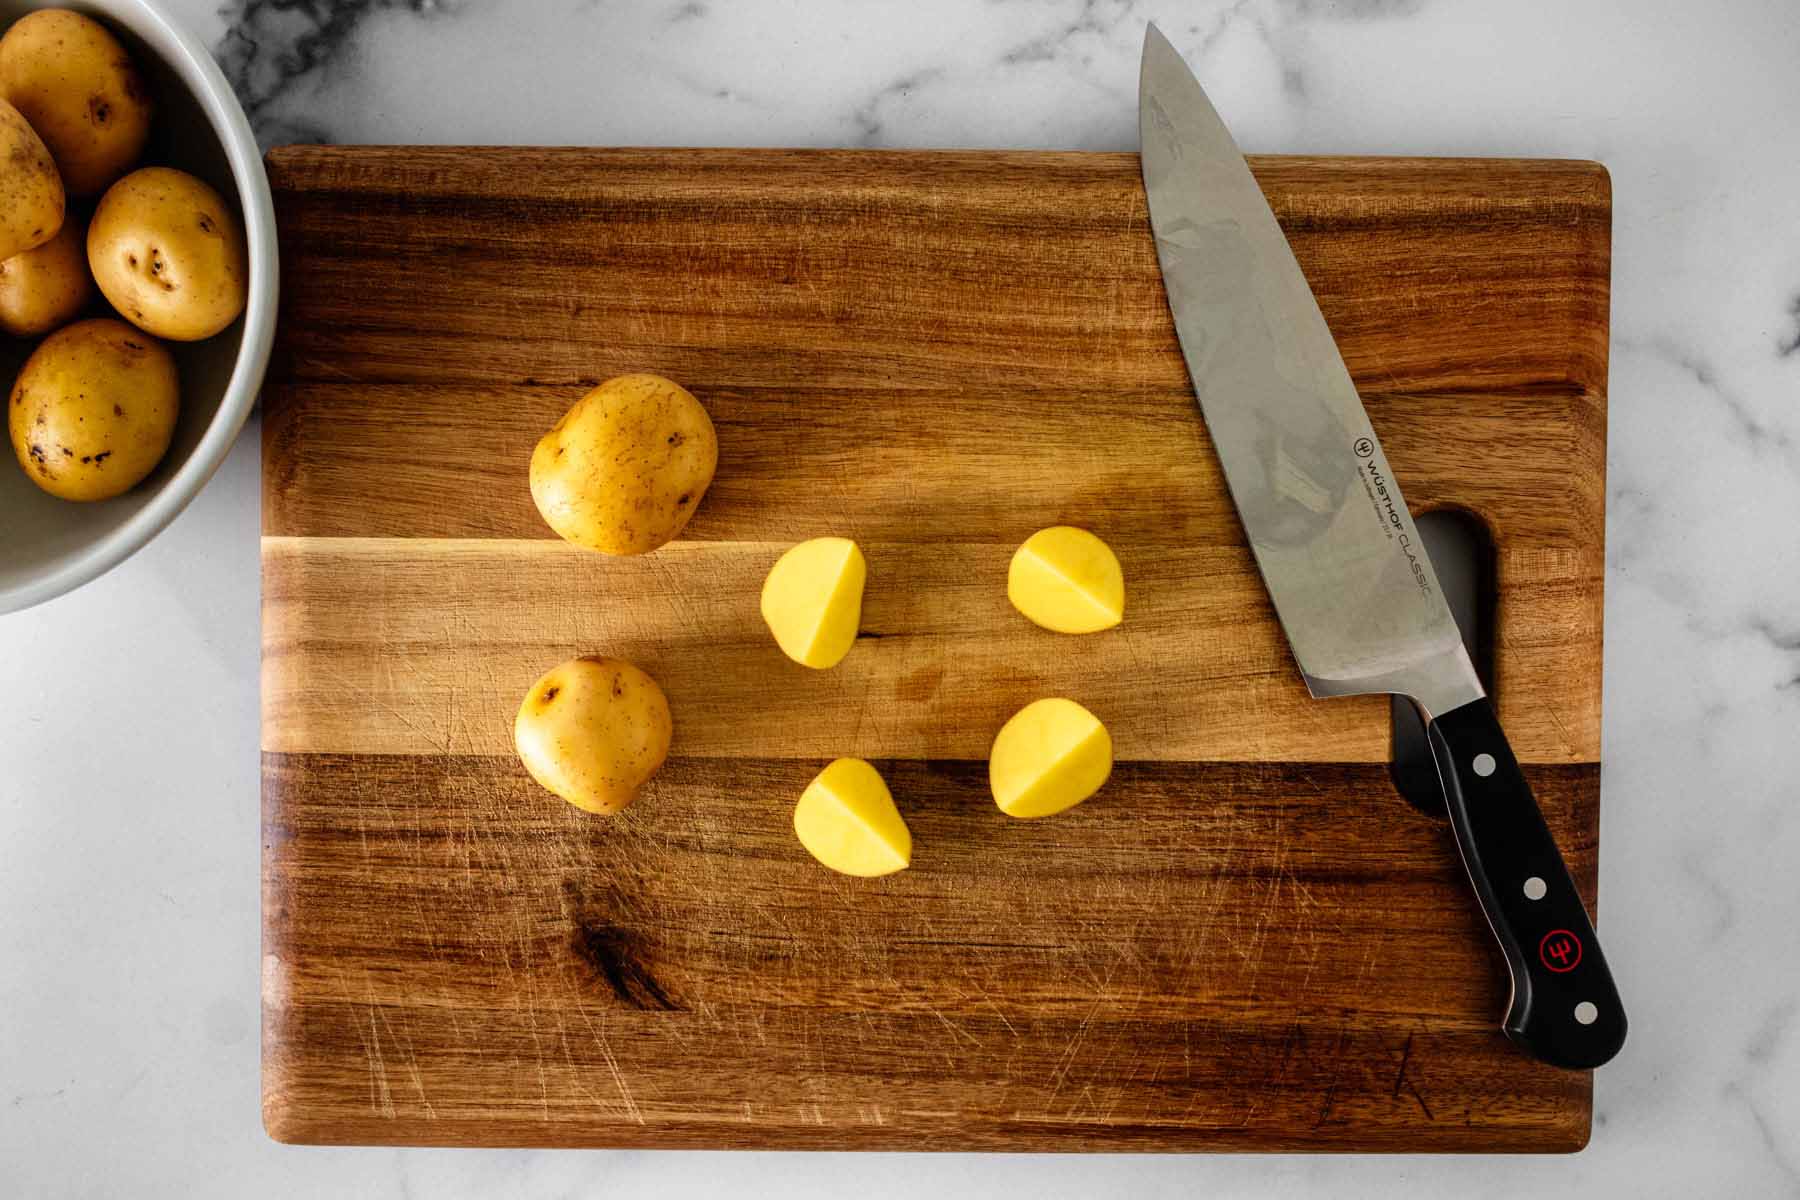 Potatoes being chopped with a chef's knife on a wooden cutting board.